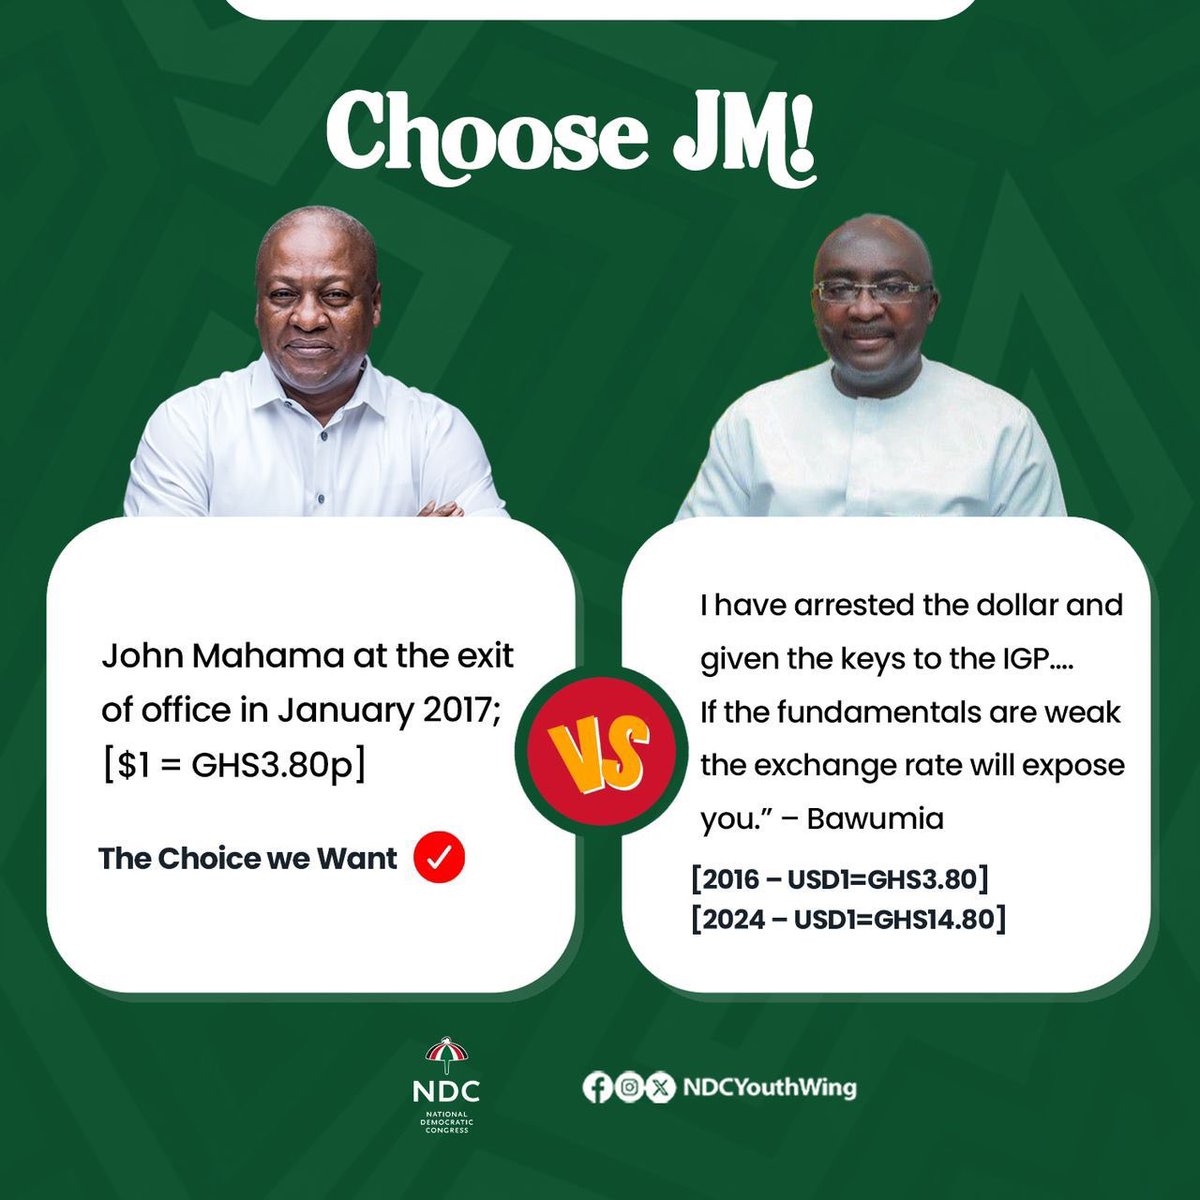 We are faced with a decision, to choose between practical leadership and one based on false promises. ChooseJM #ChangeIsComing